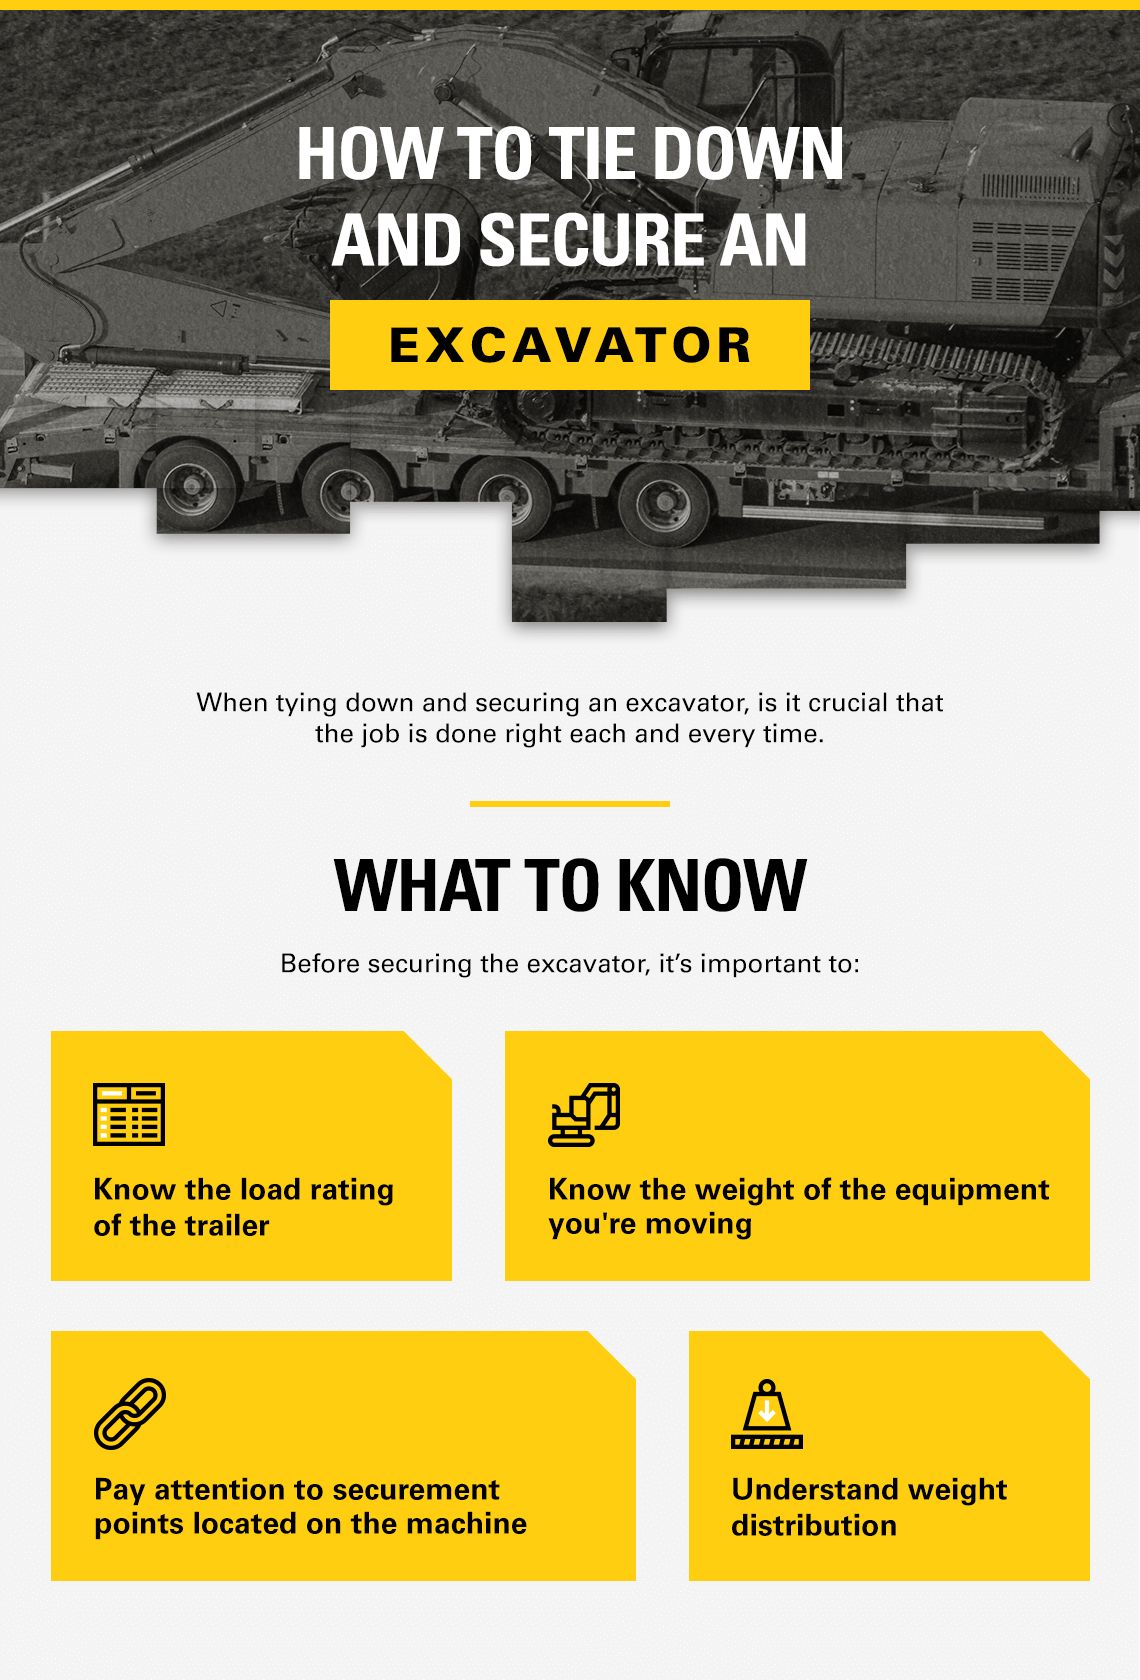 How to Tie Down and Secure an Excavator